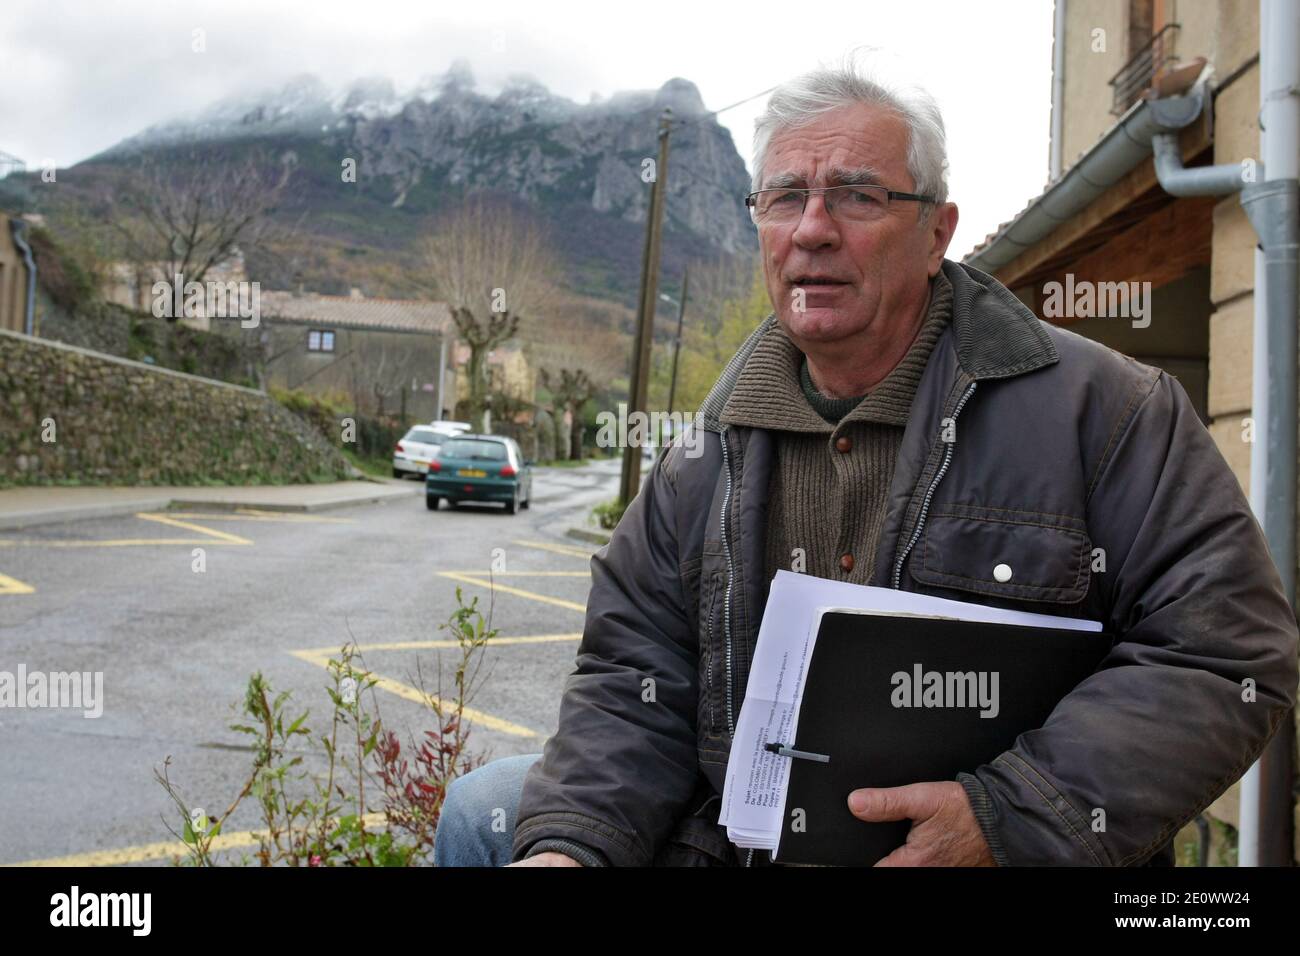 Bugarach mayor Jean Pierre Delord is seen in Bugarach, France on December  5, 2012. The peak of Bugarach is the culminating point of the Corbieres  range (foothills of the Pyrenees Mountains). Some